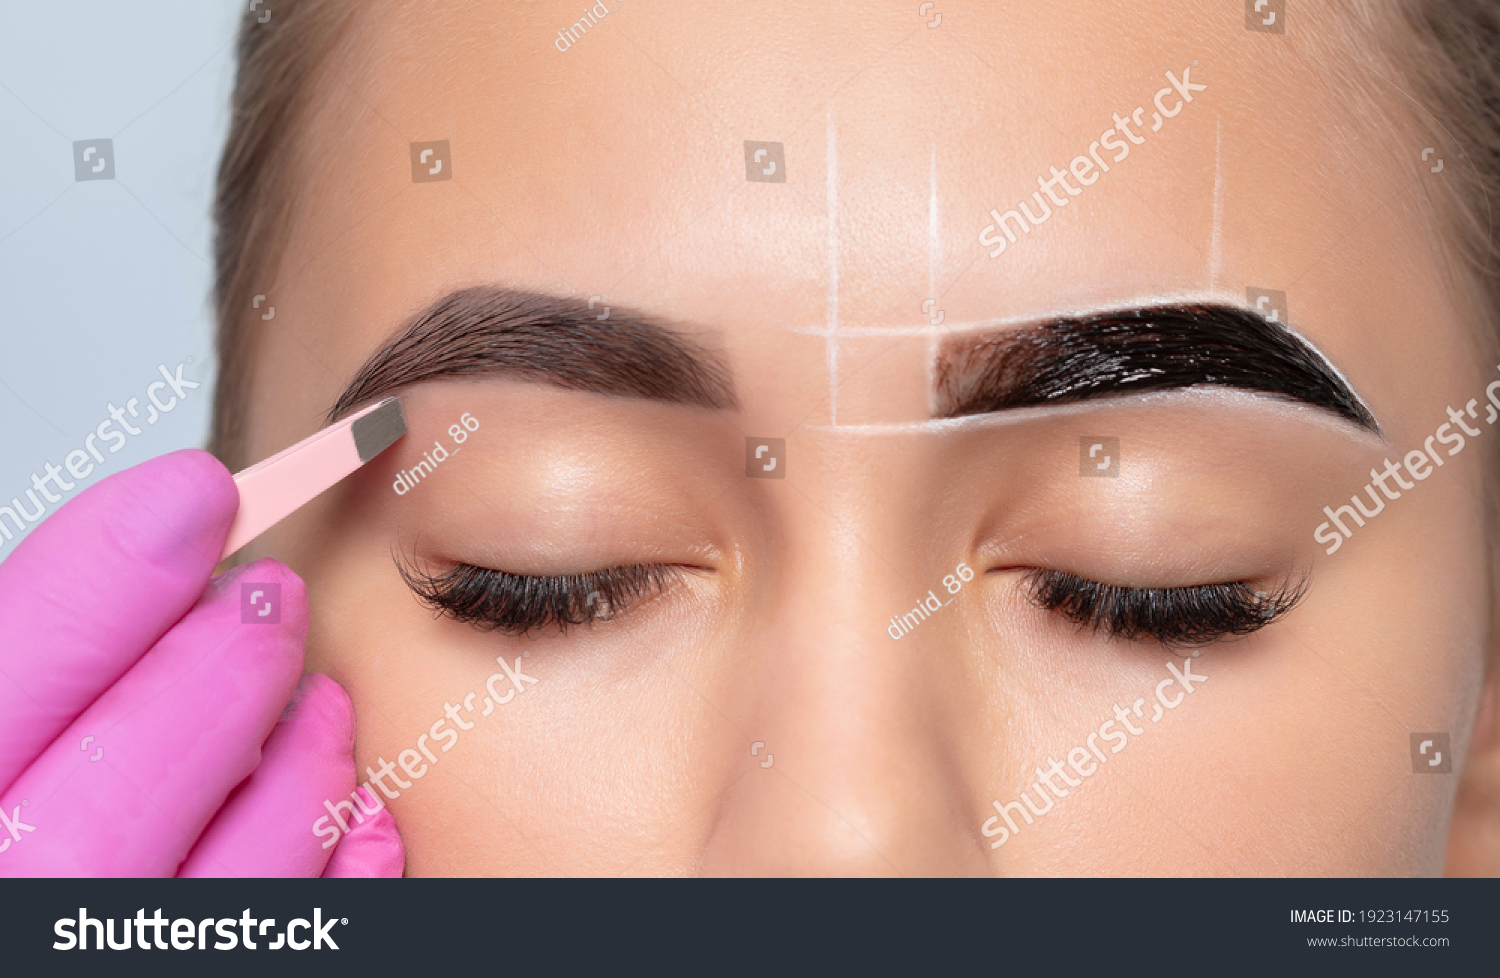 Make-up artist makes markings with white pencil for eyebrow and paints eyebrows. Professional makeup and facial care. #1923147155